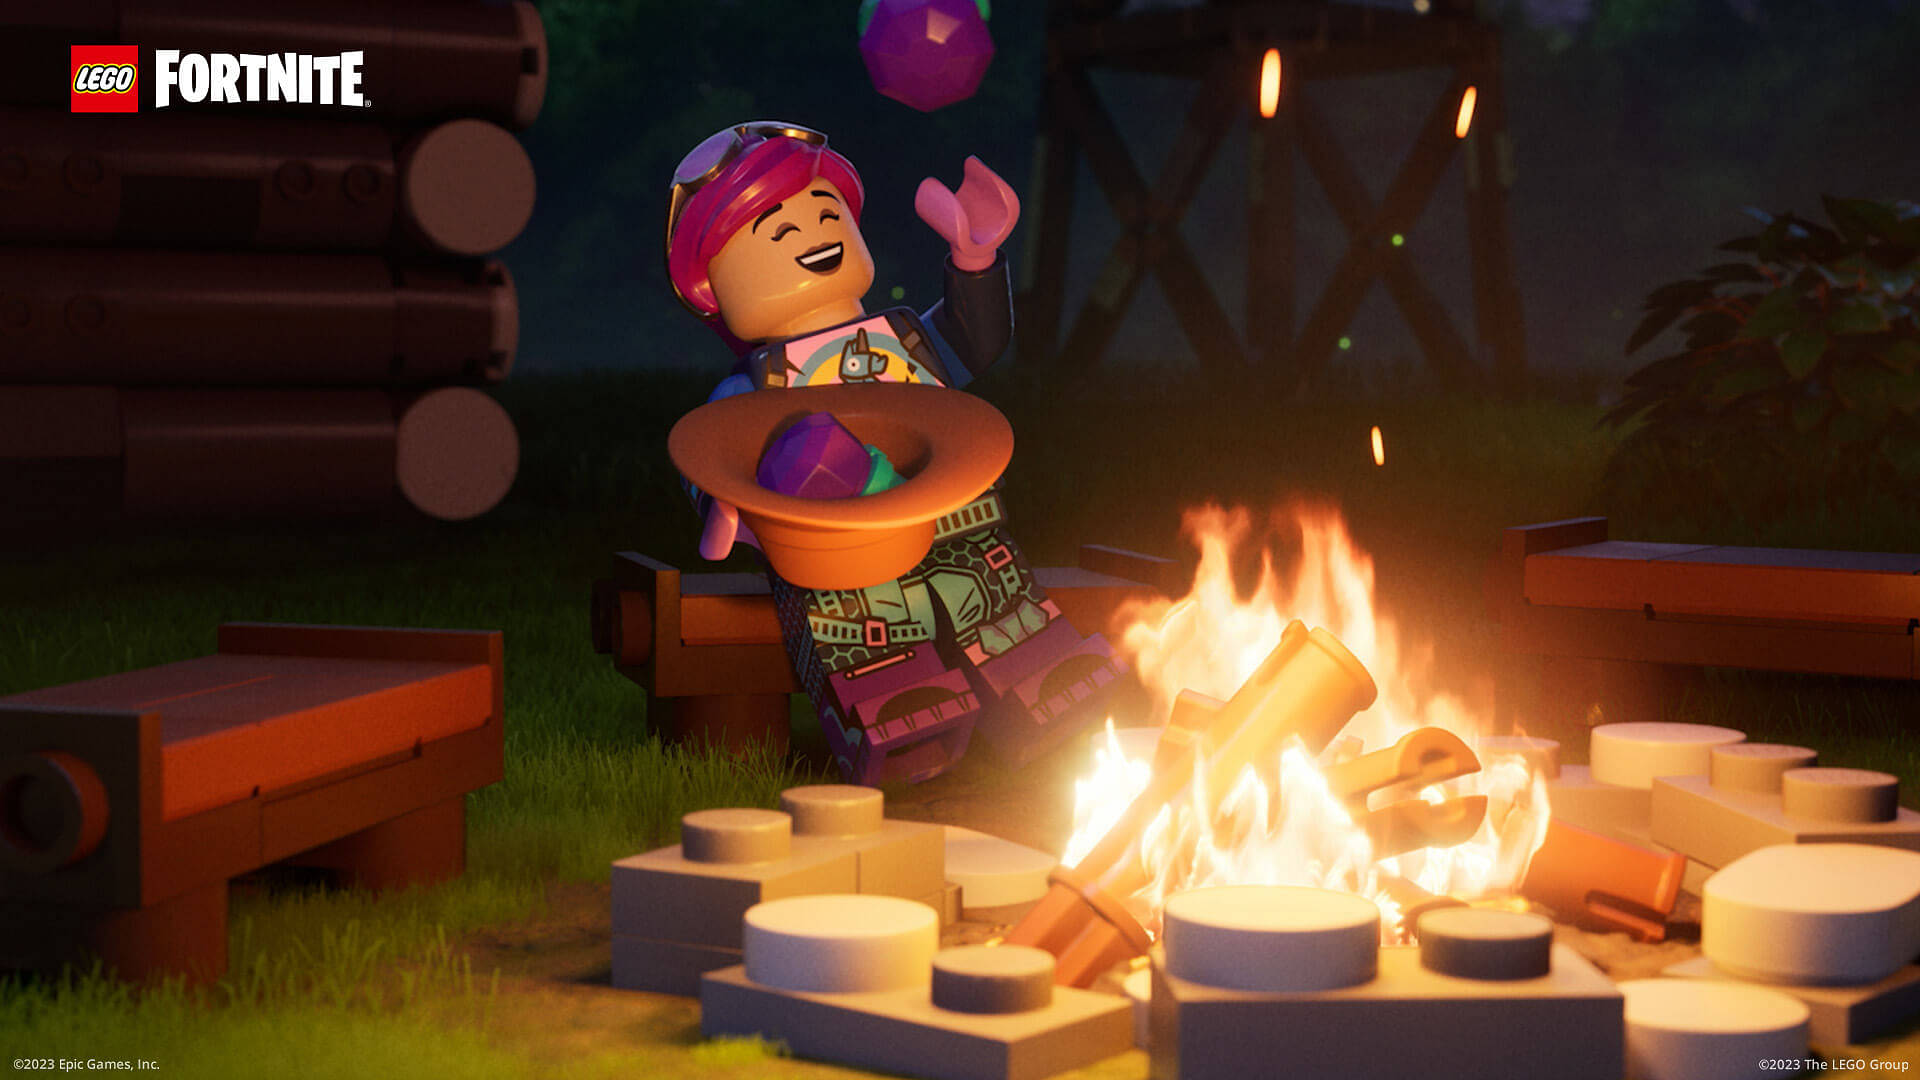 An image showing LEGO Fortnite character eating food